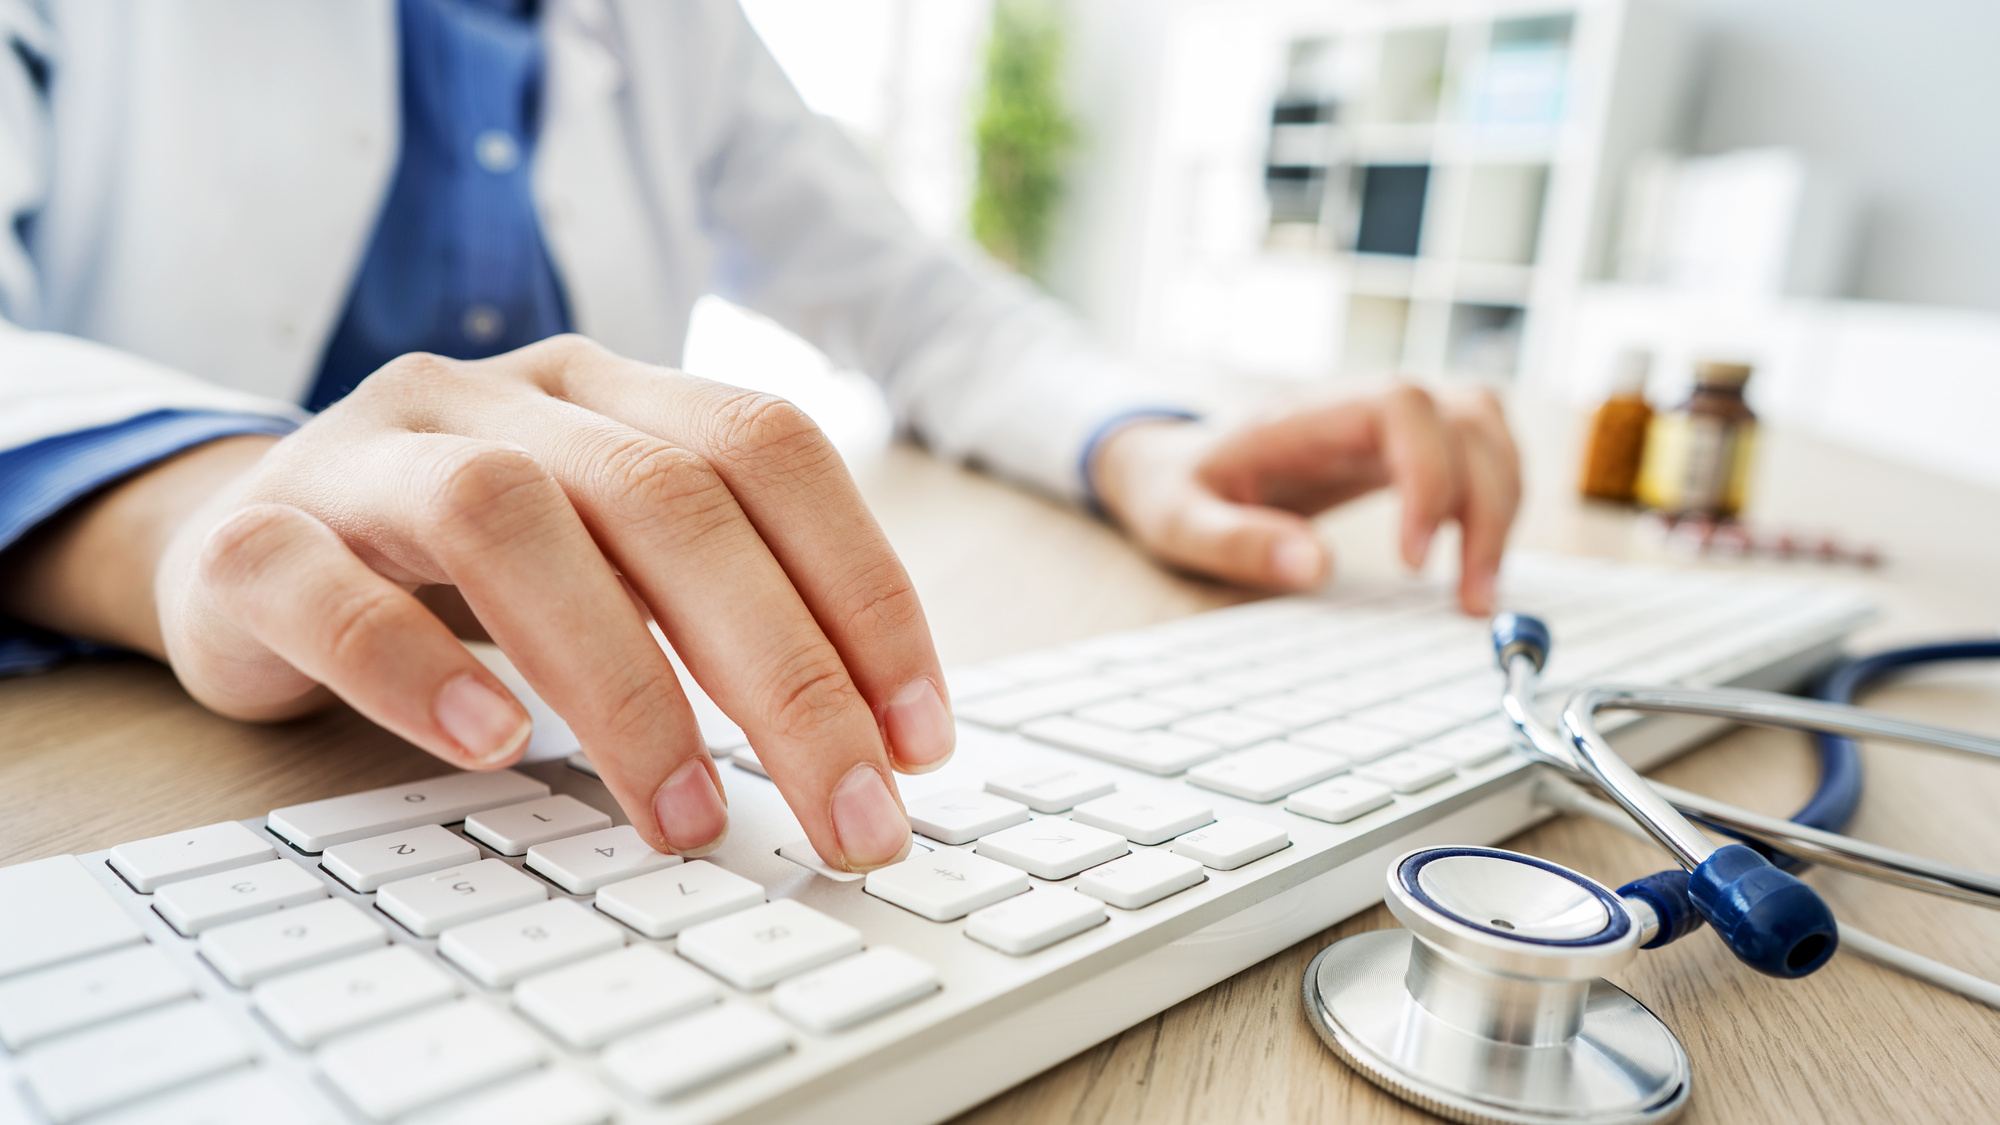 Why Is Medical Coding Essential in Healthcare?